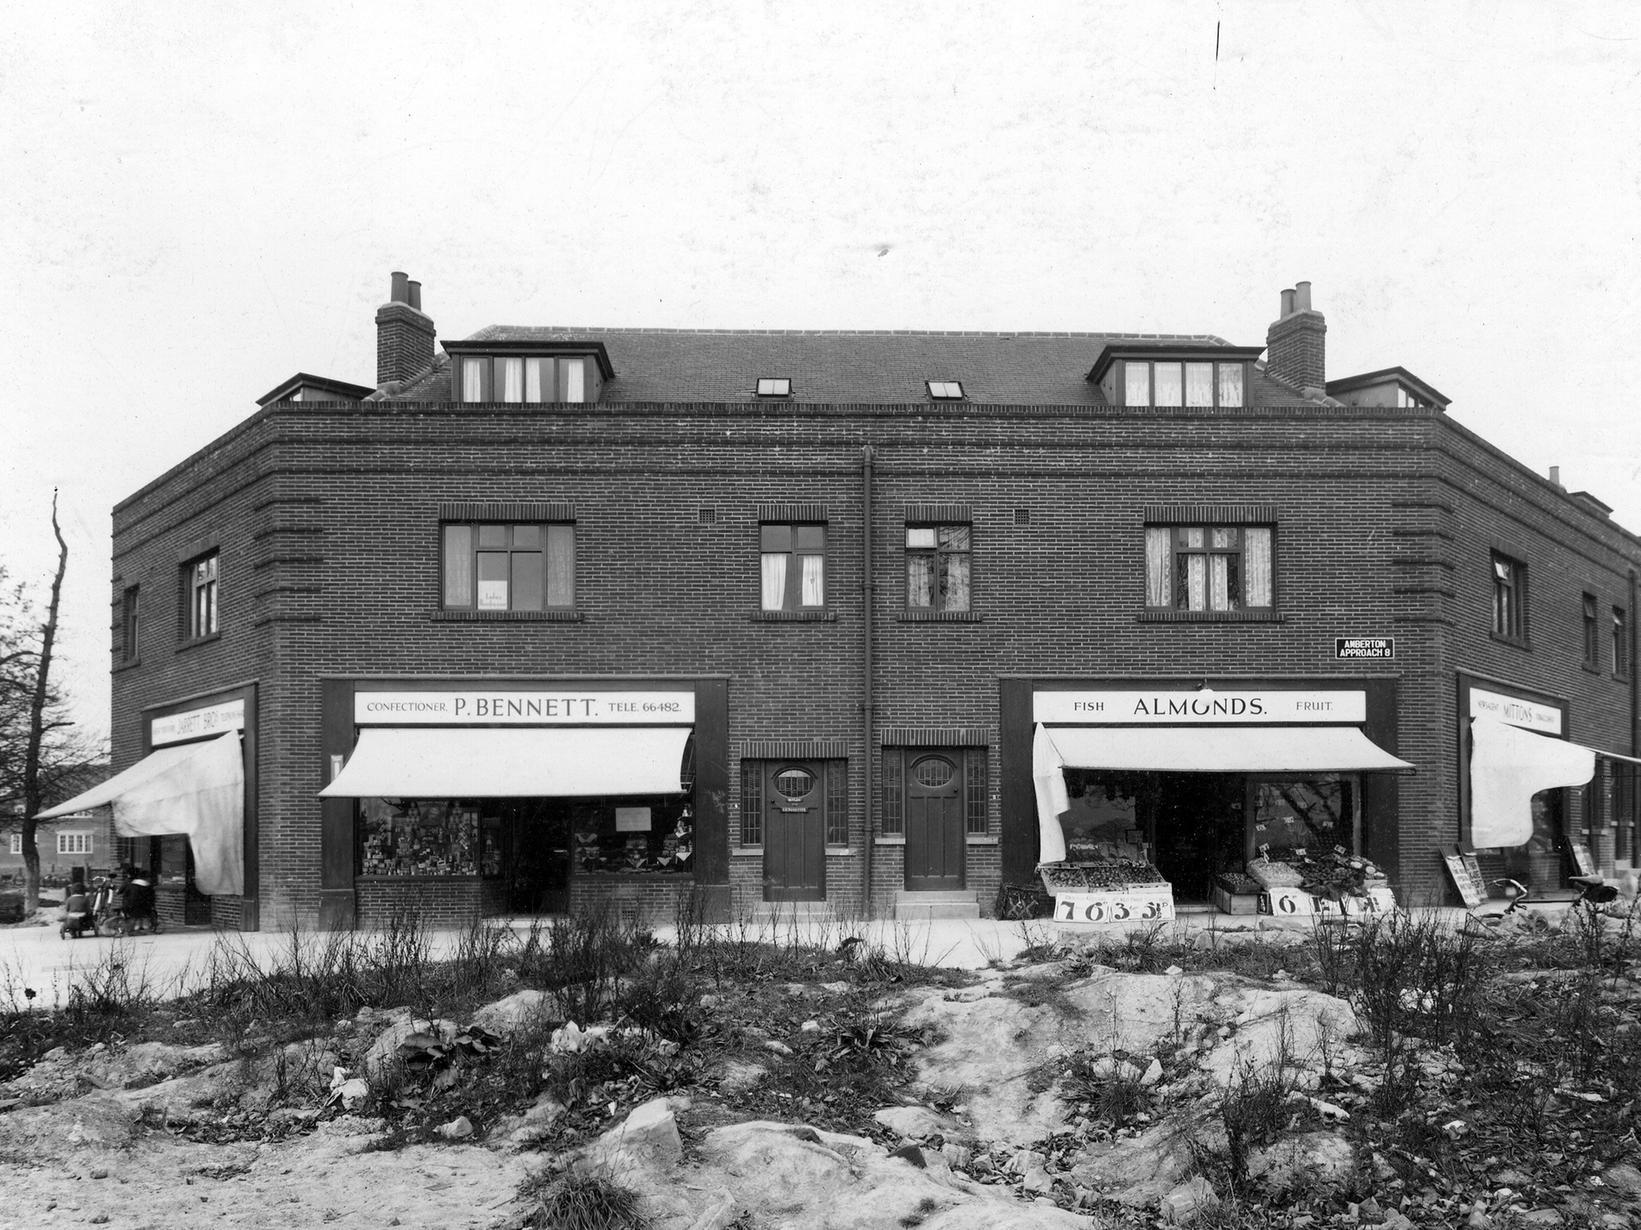 A parade of shops on Amberton Approach, Oakwood Lane. From left to right, are Jarrett Bros, P. Bennett, confectioner, Almonds fish and fruit and Mittons Newsagent.